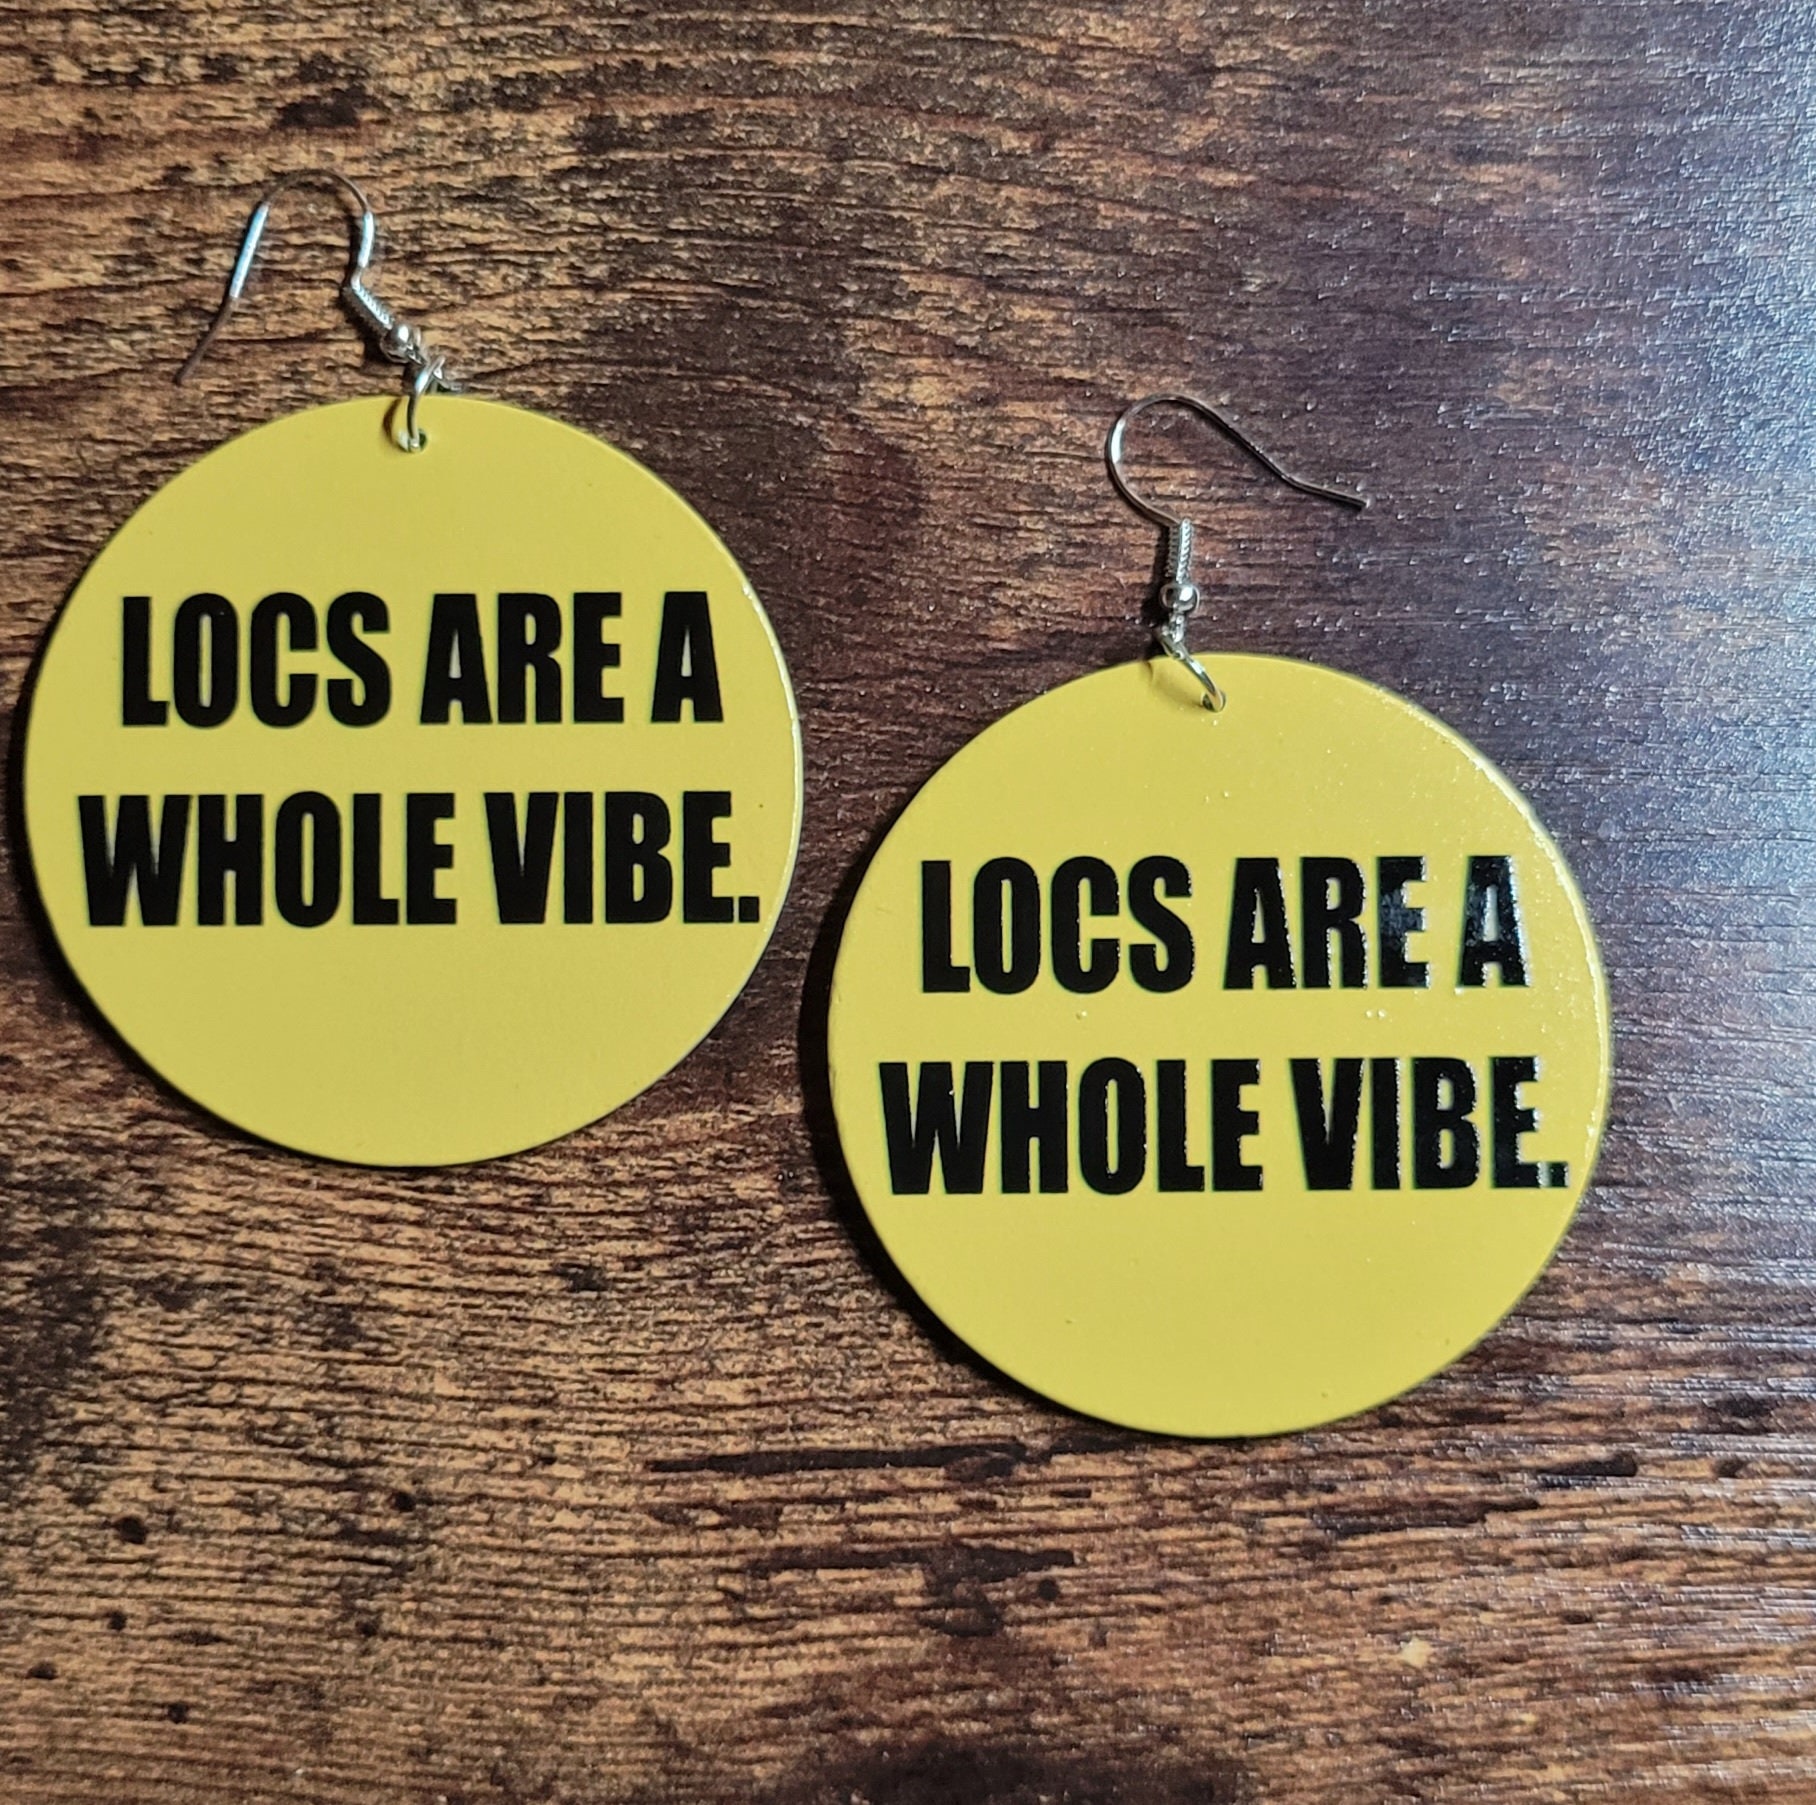 Schedule Appointment with Locs of Vibes